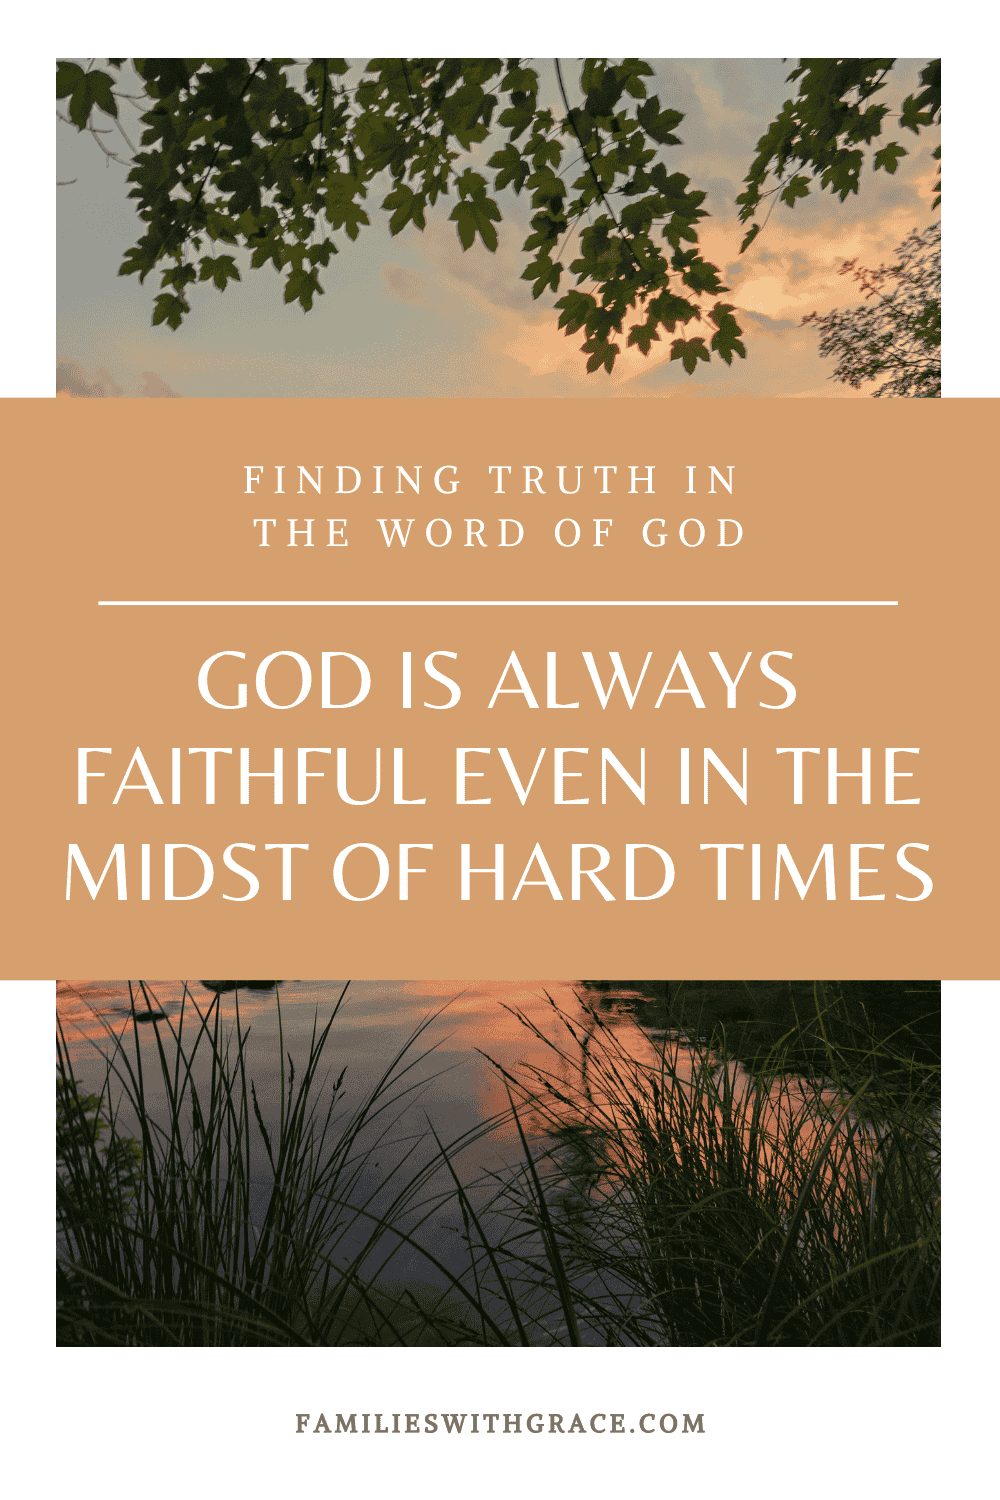 God is always faithful even in the midst of hard times